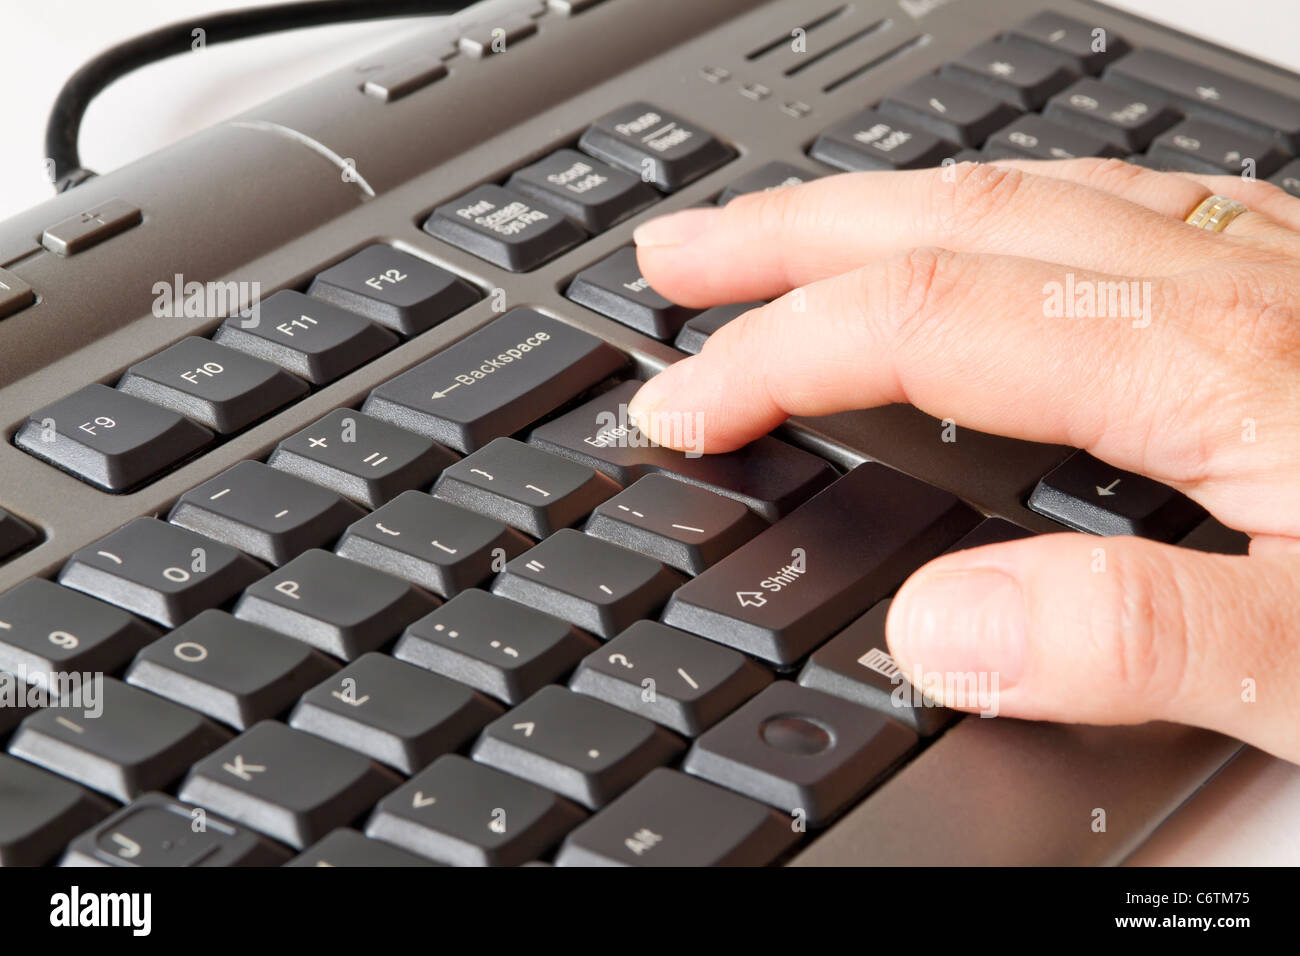 hand pressing enter on keyboard Stock Photo